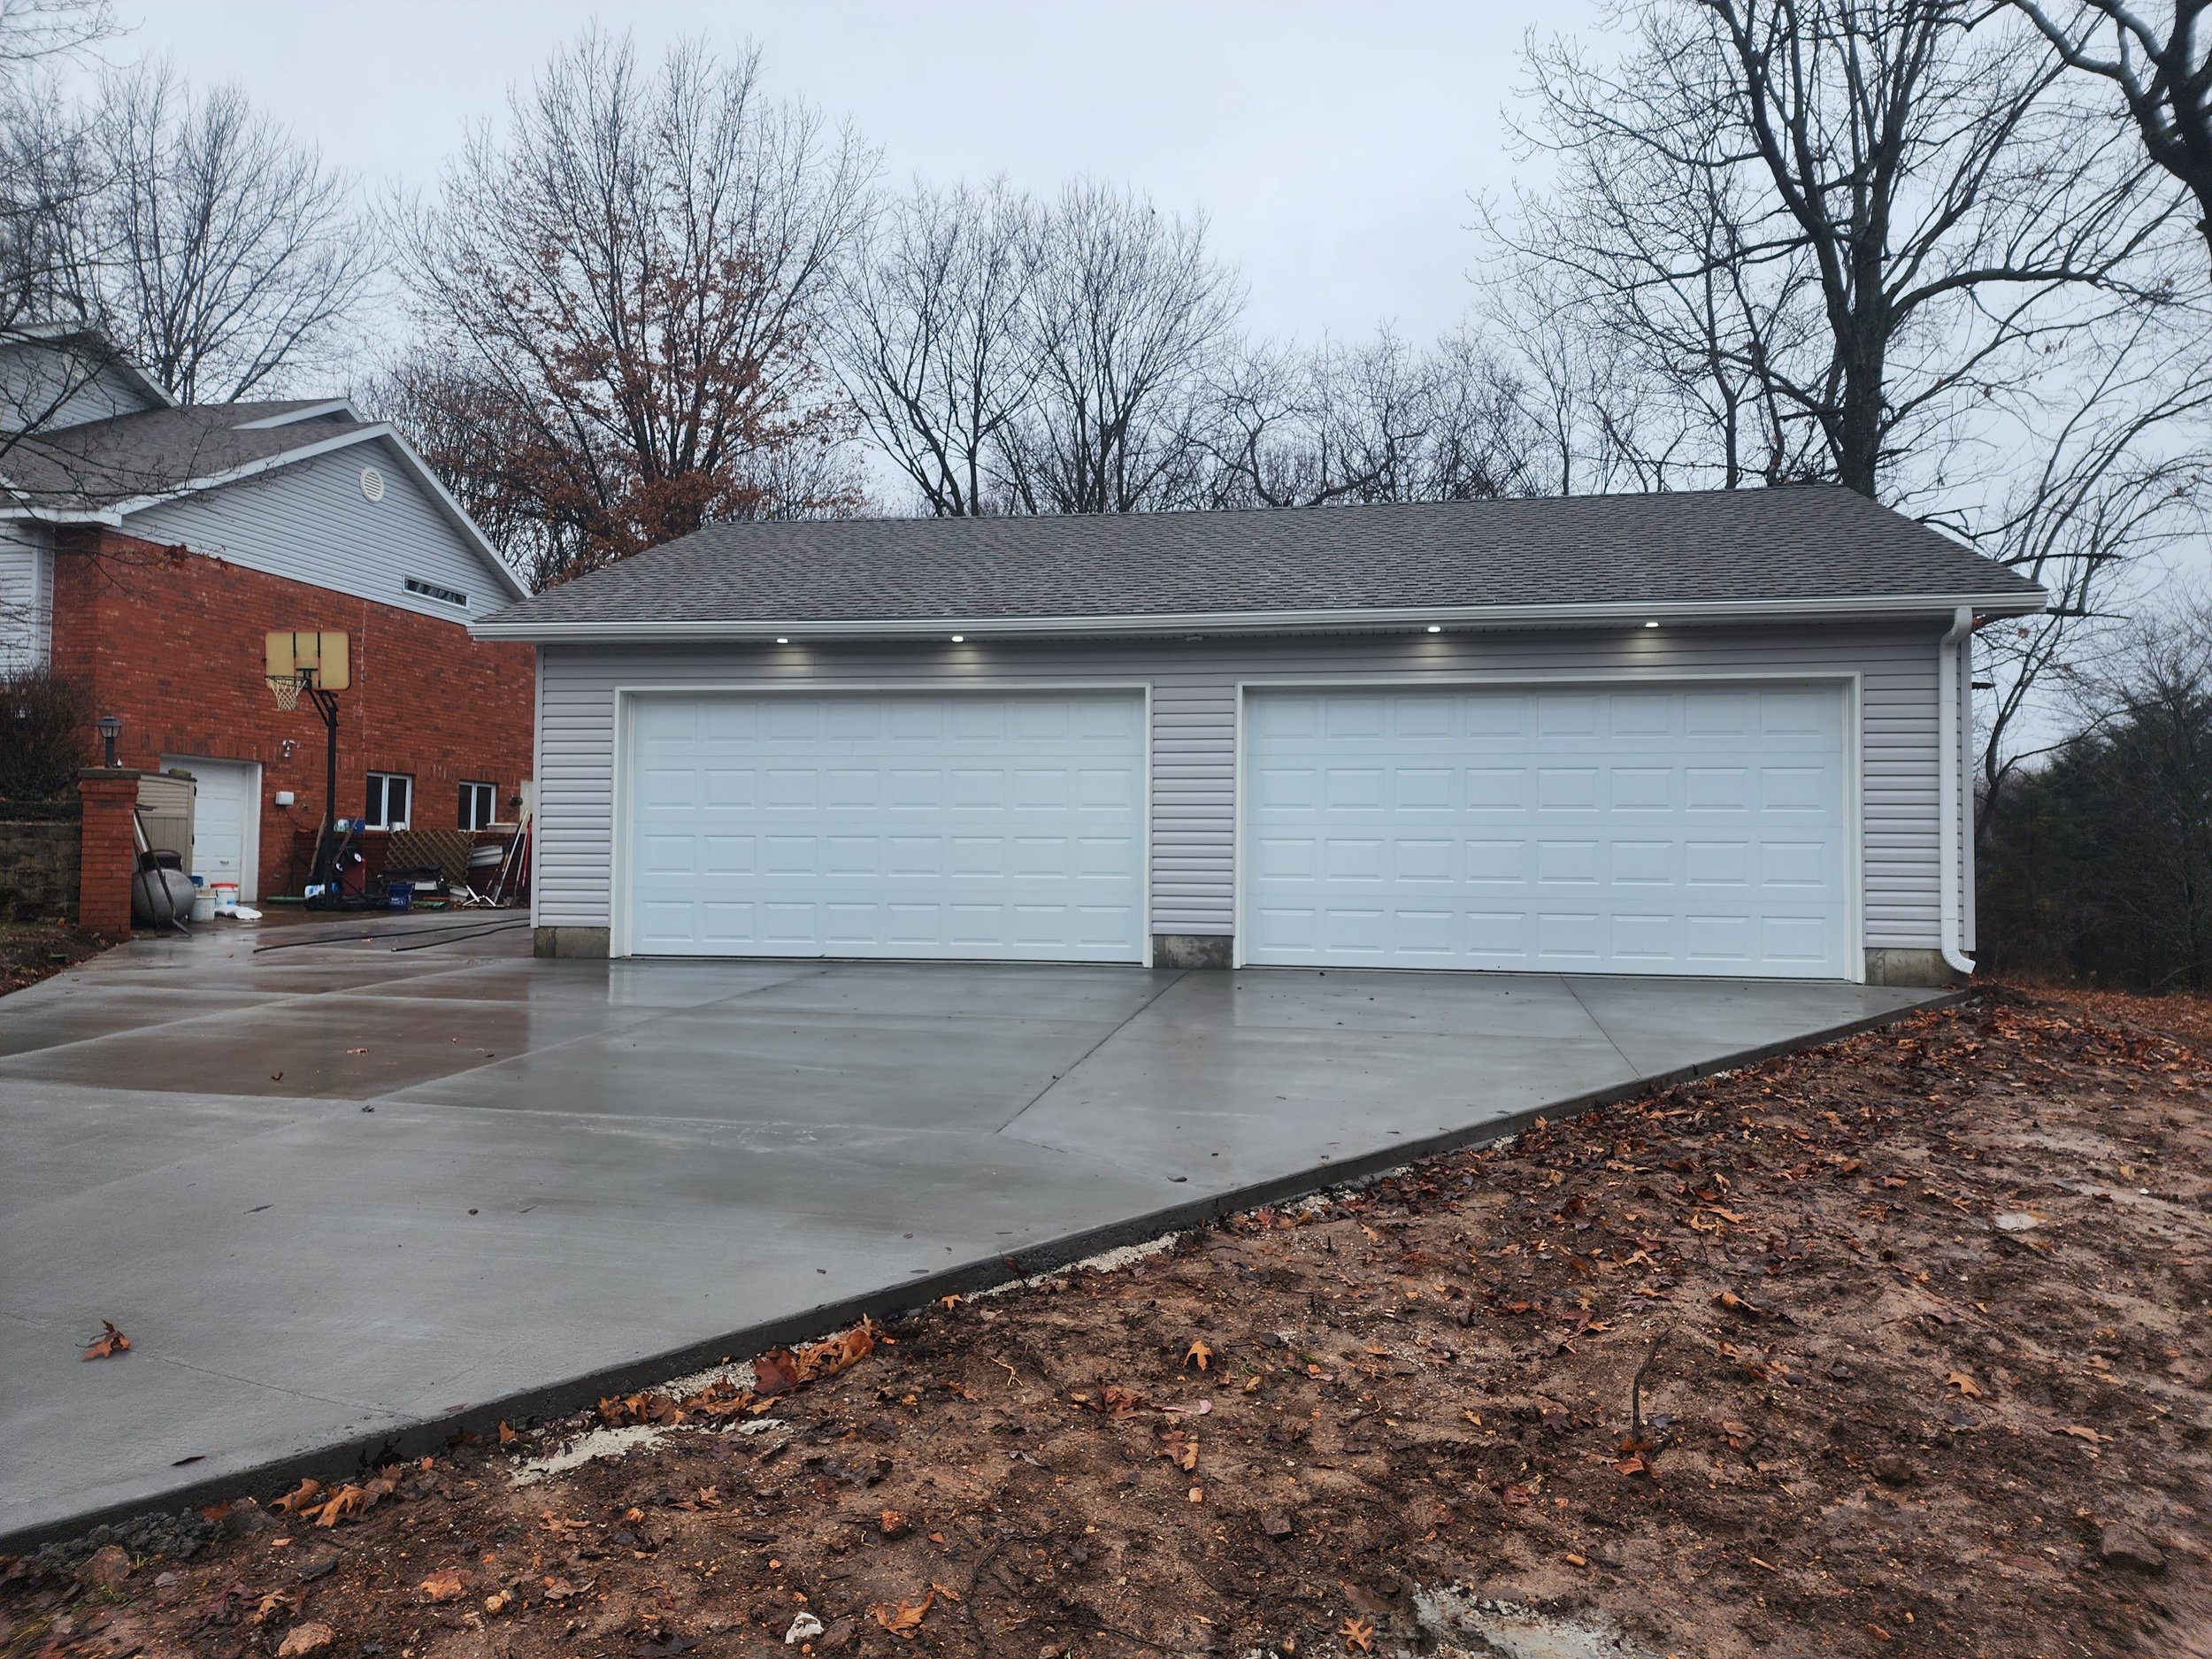  brand new double garage with white doors and gray siding 